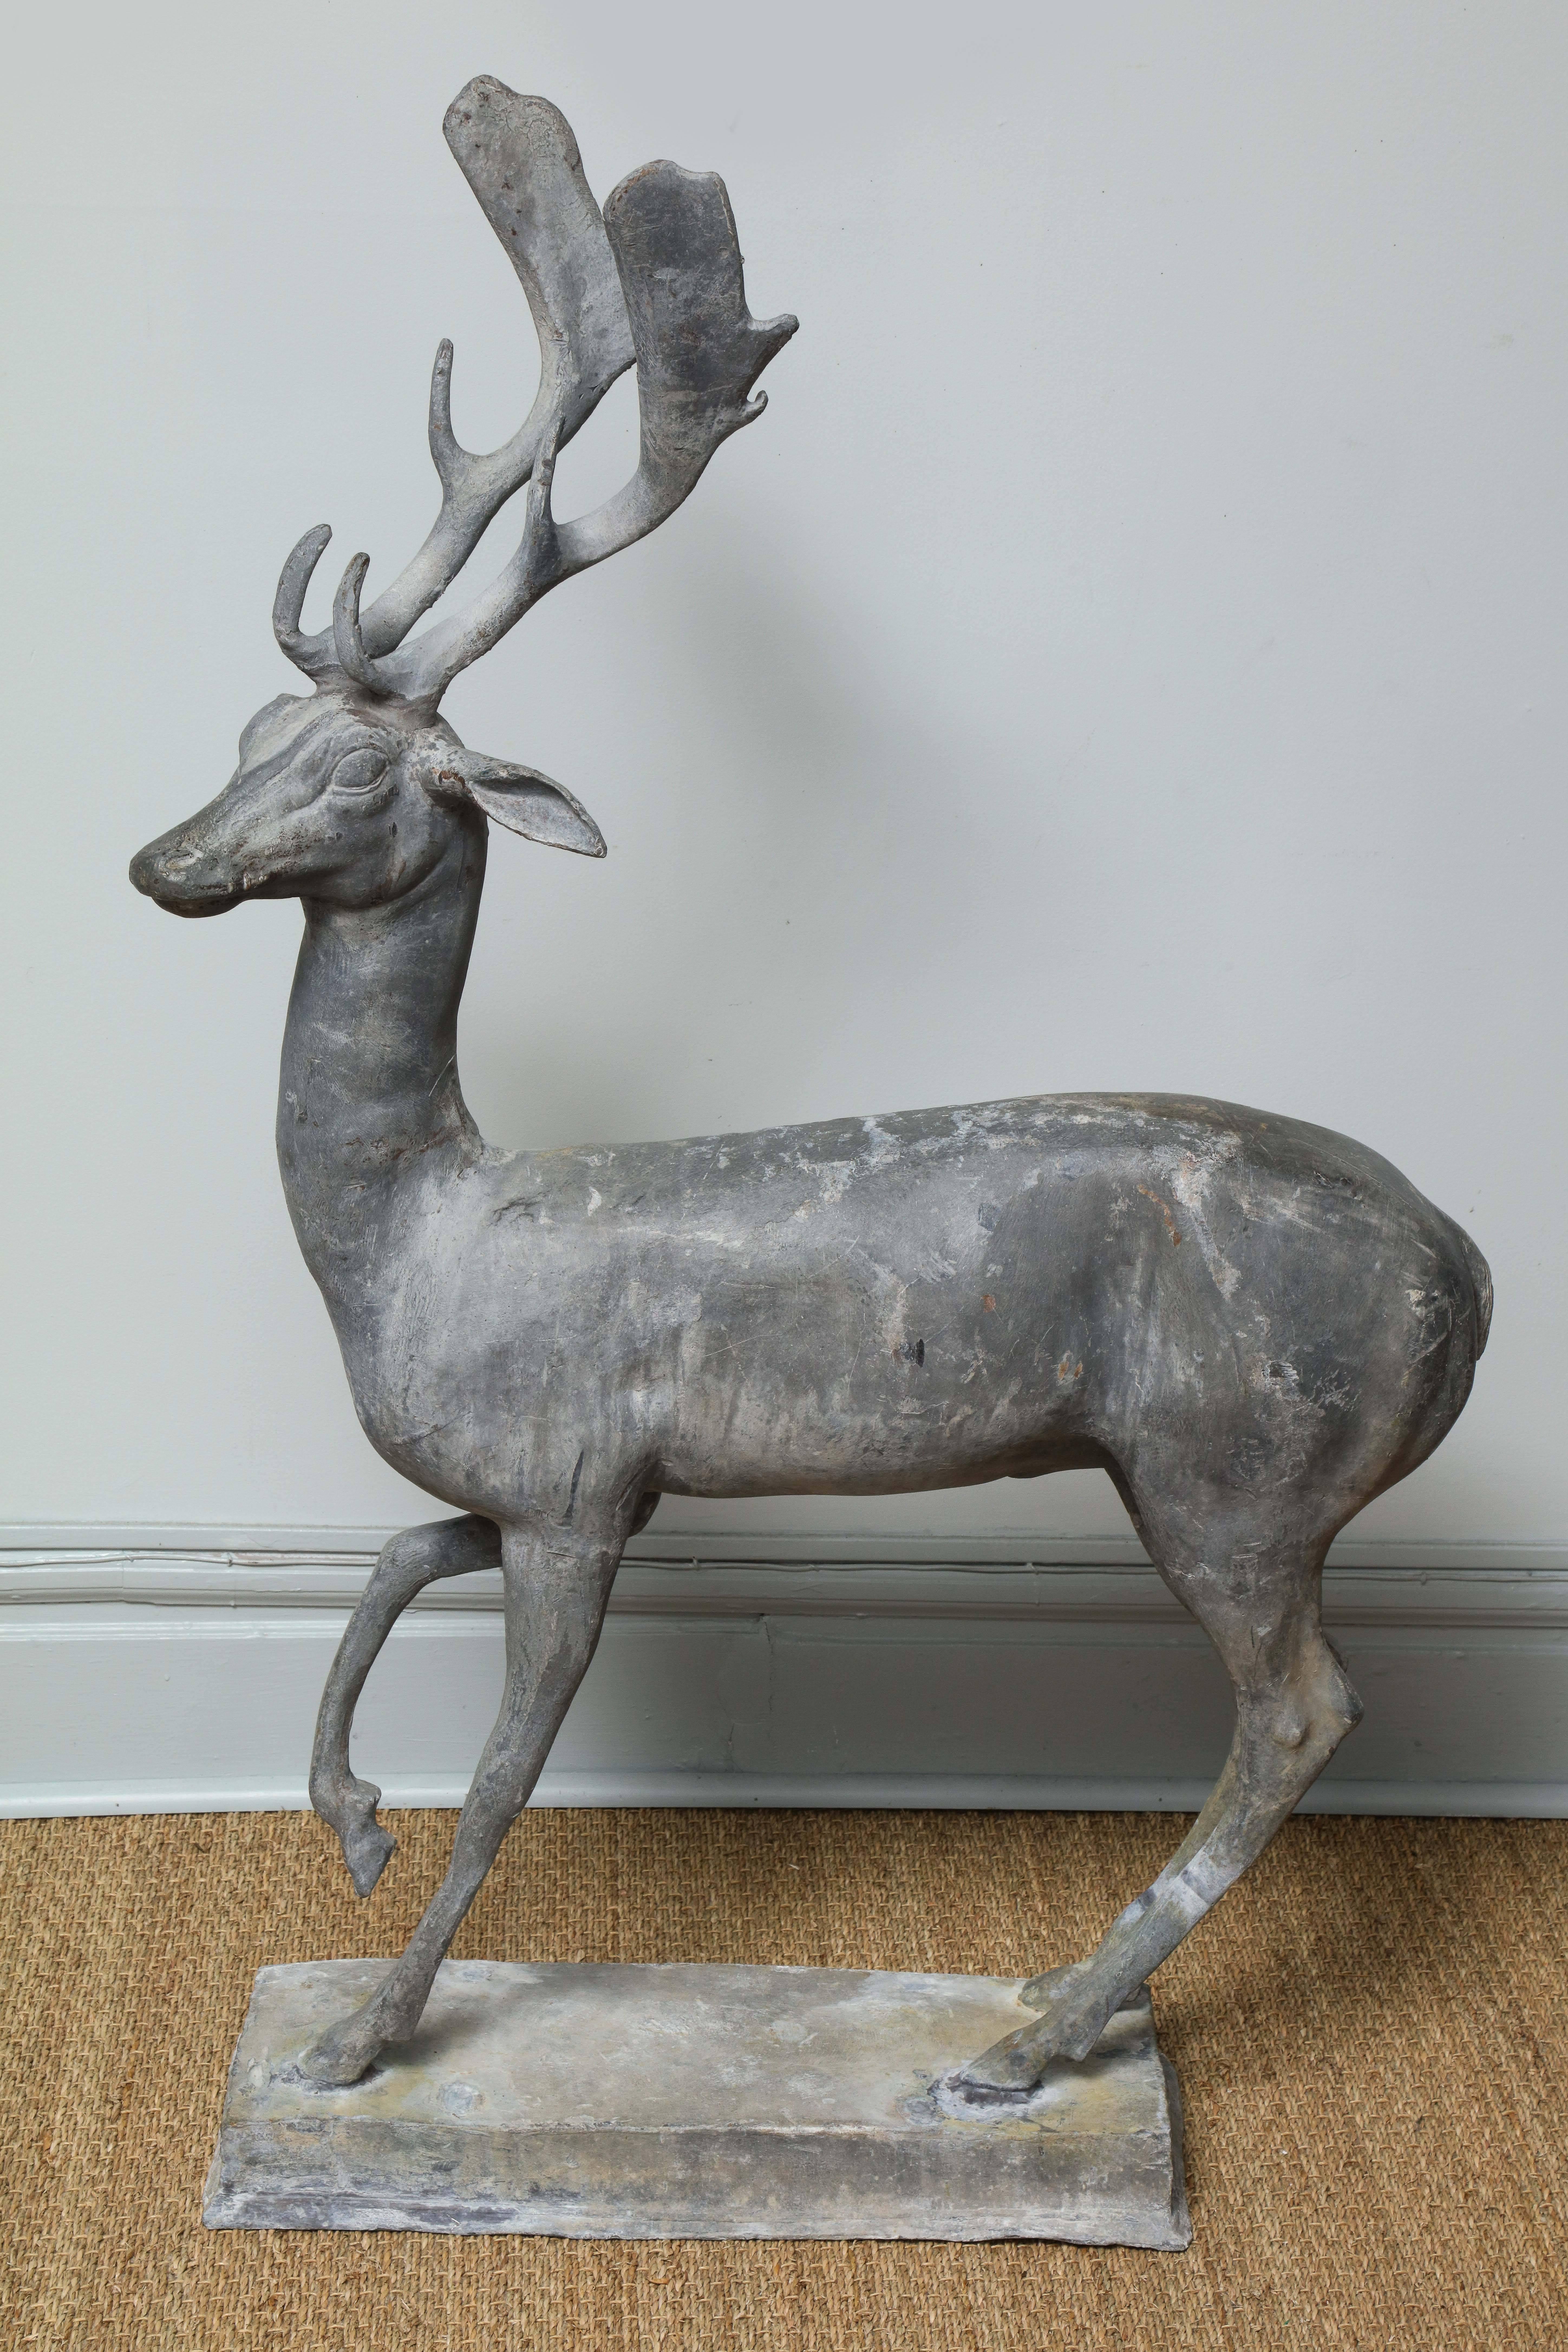 An enchanted stag captured in mid-stride. He has a whimsical expression on his turned face, alert ears and is standing in a watchful pose with a raised right front paw. This is a very rare 18th century English garden statue in heavy lead. It is